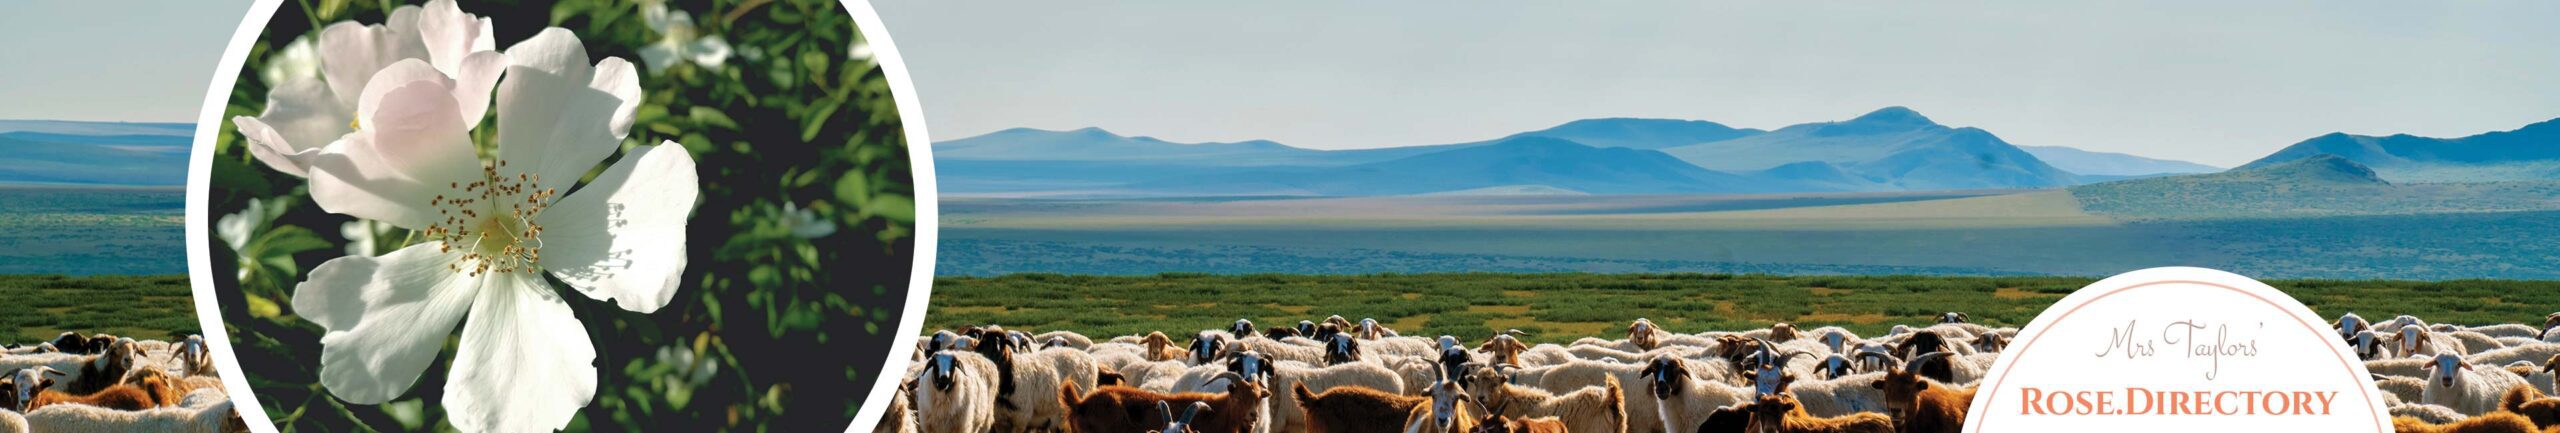 Herd of goats in Mongolia and a white wild rose